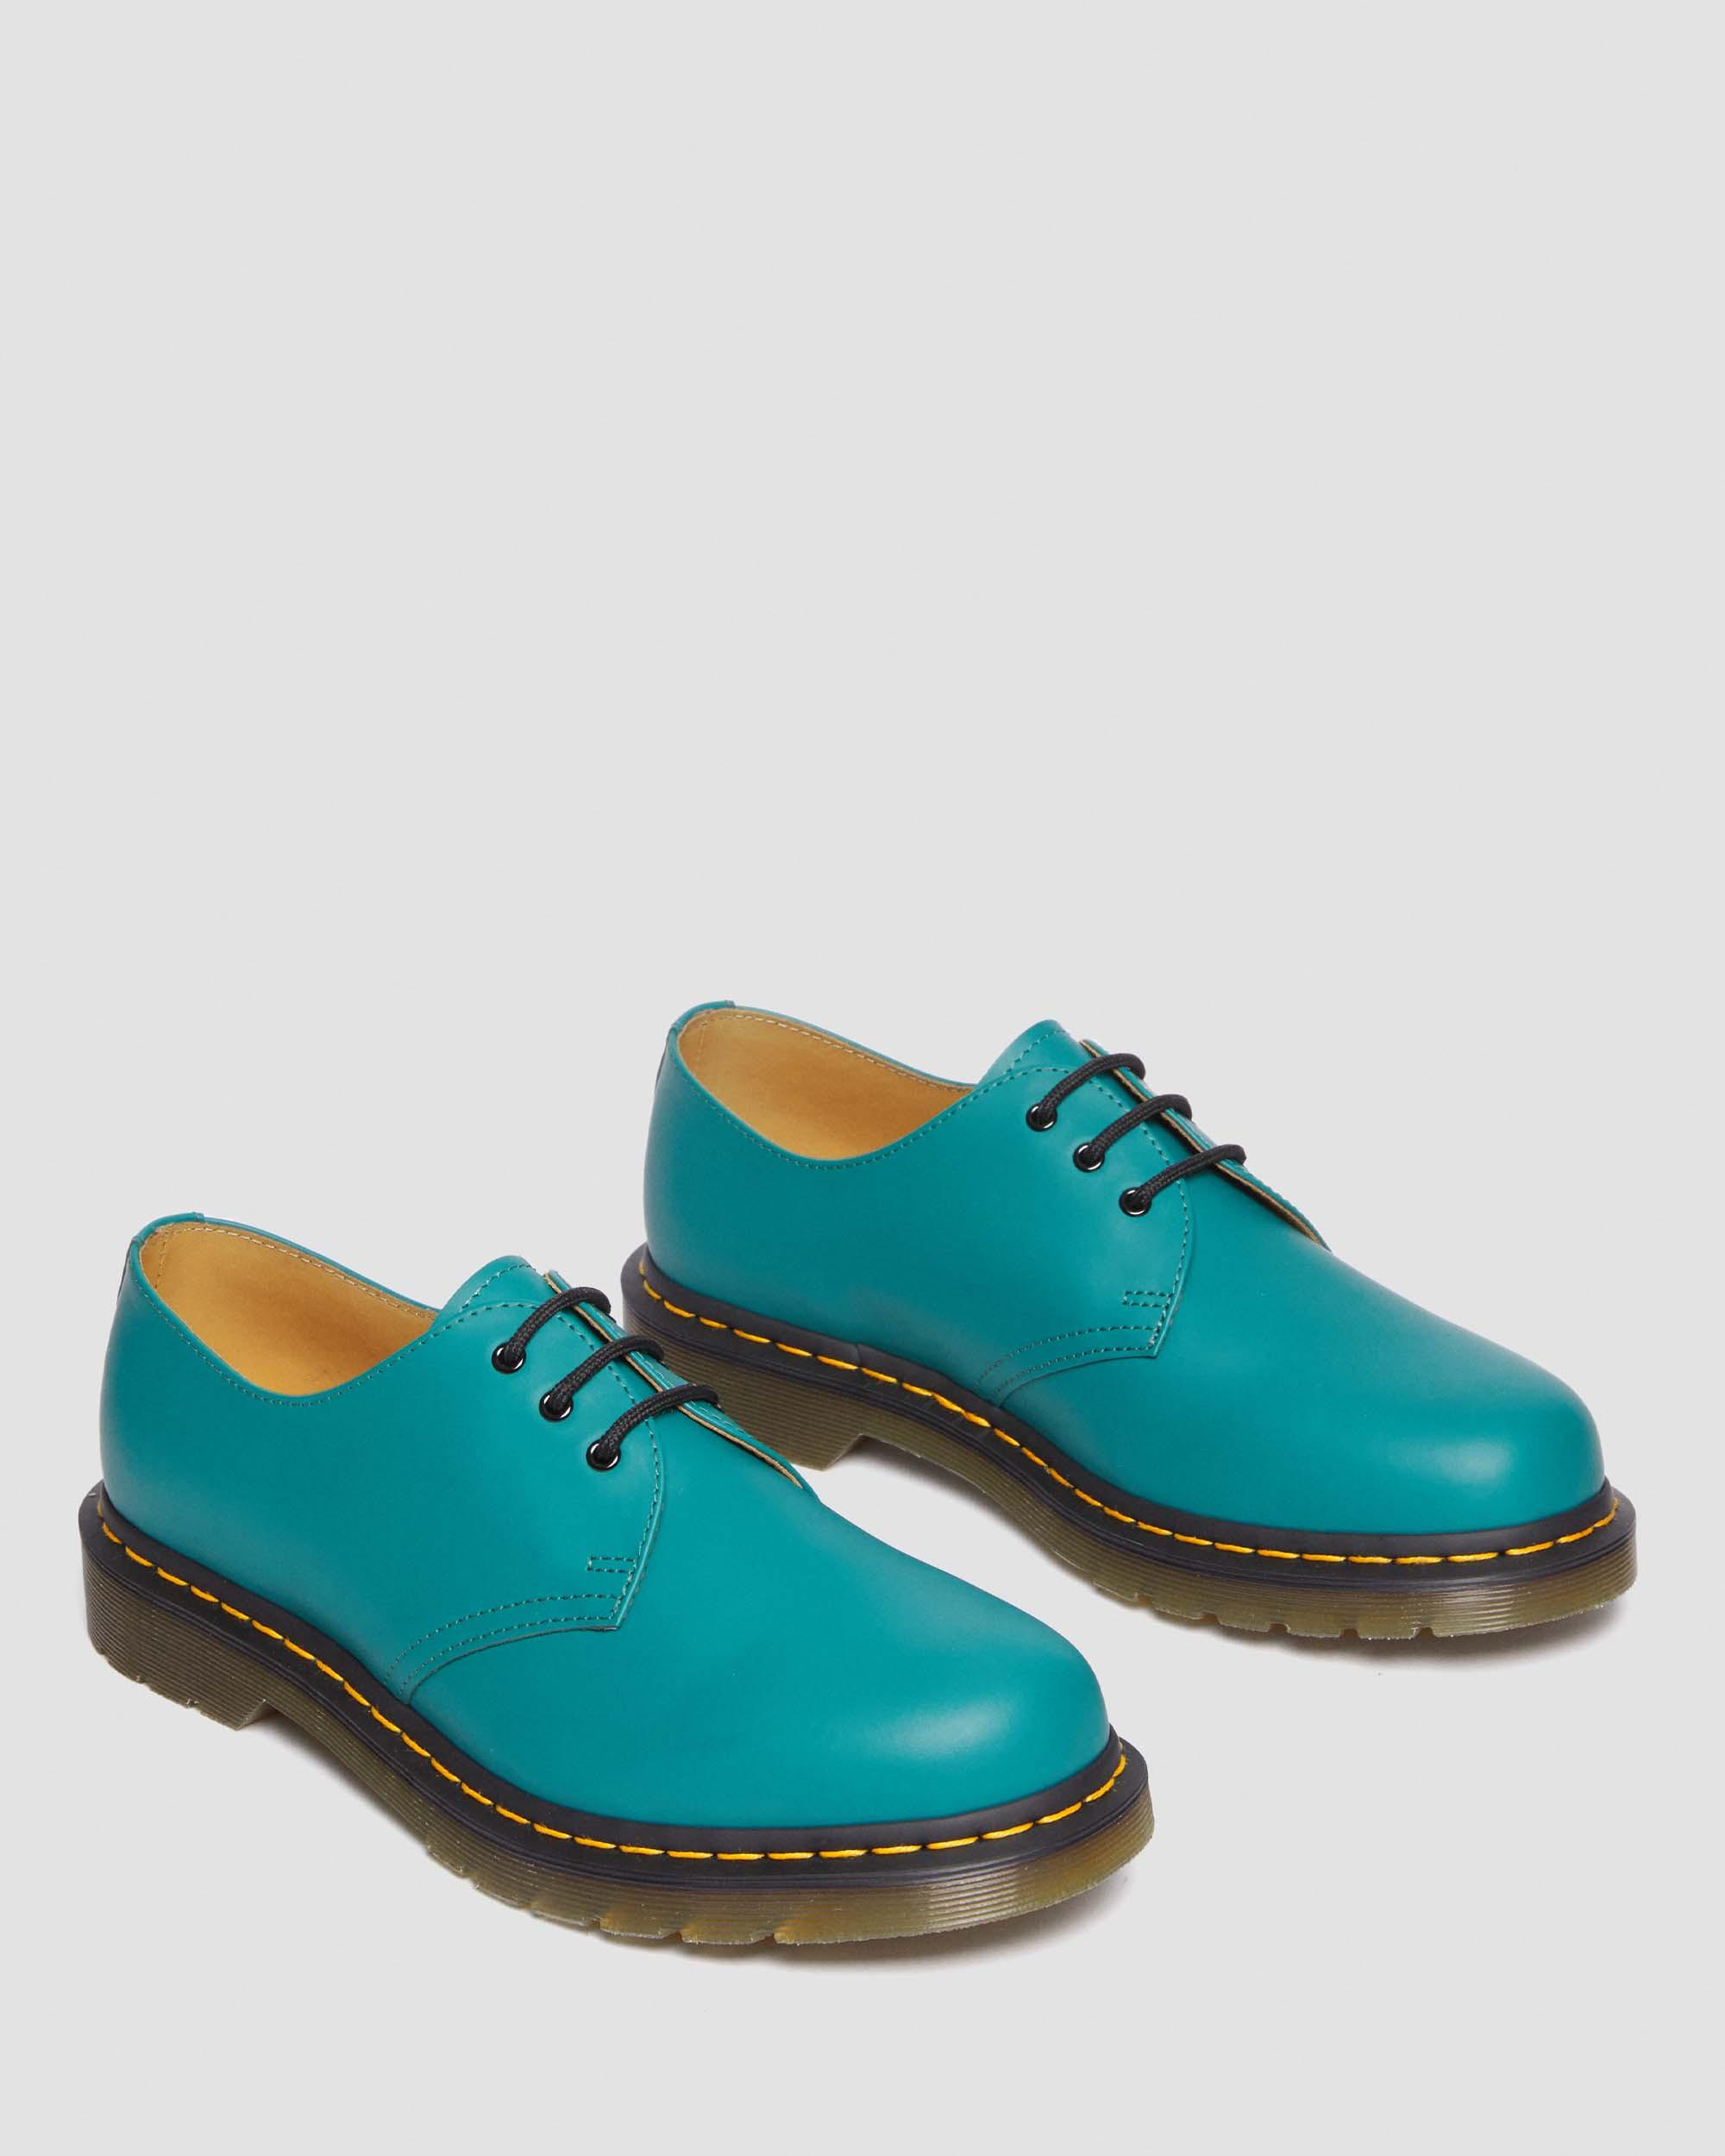 1461 Smooth Leather Oxford Shoes in Teal Green | Dr. Martens